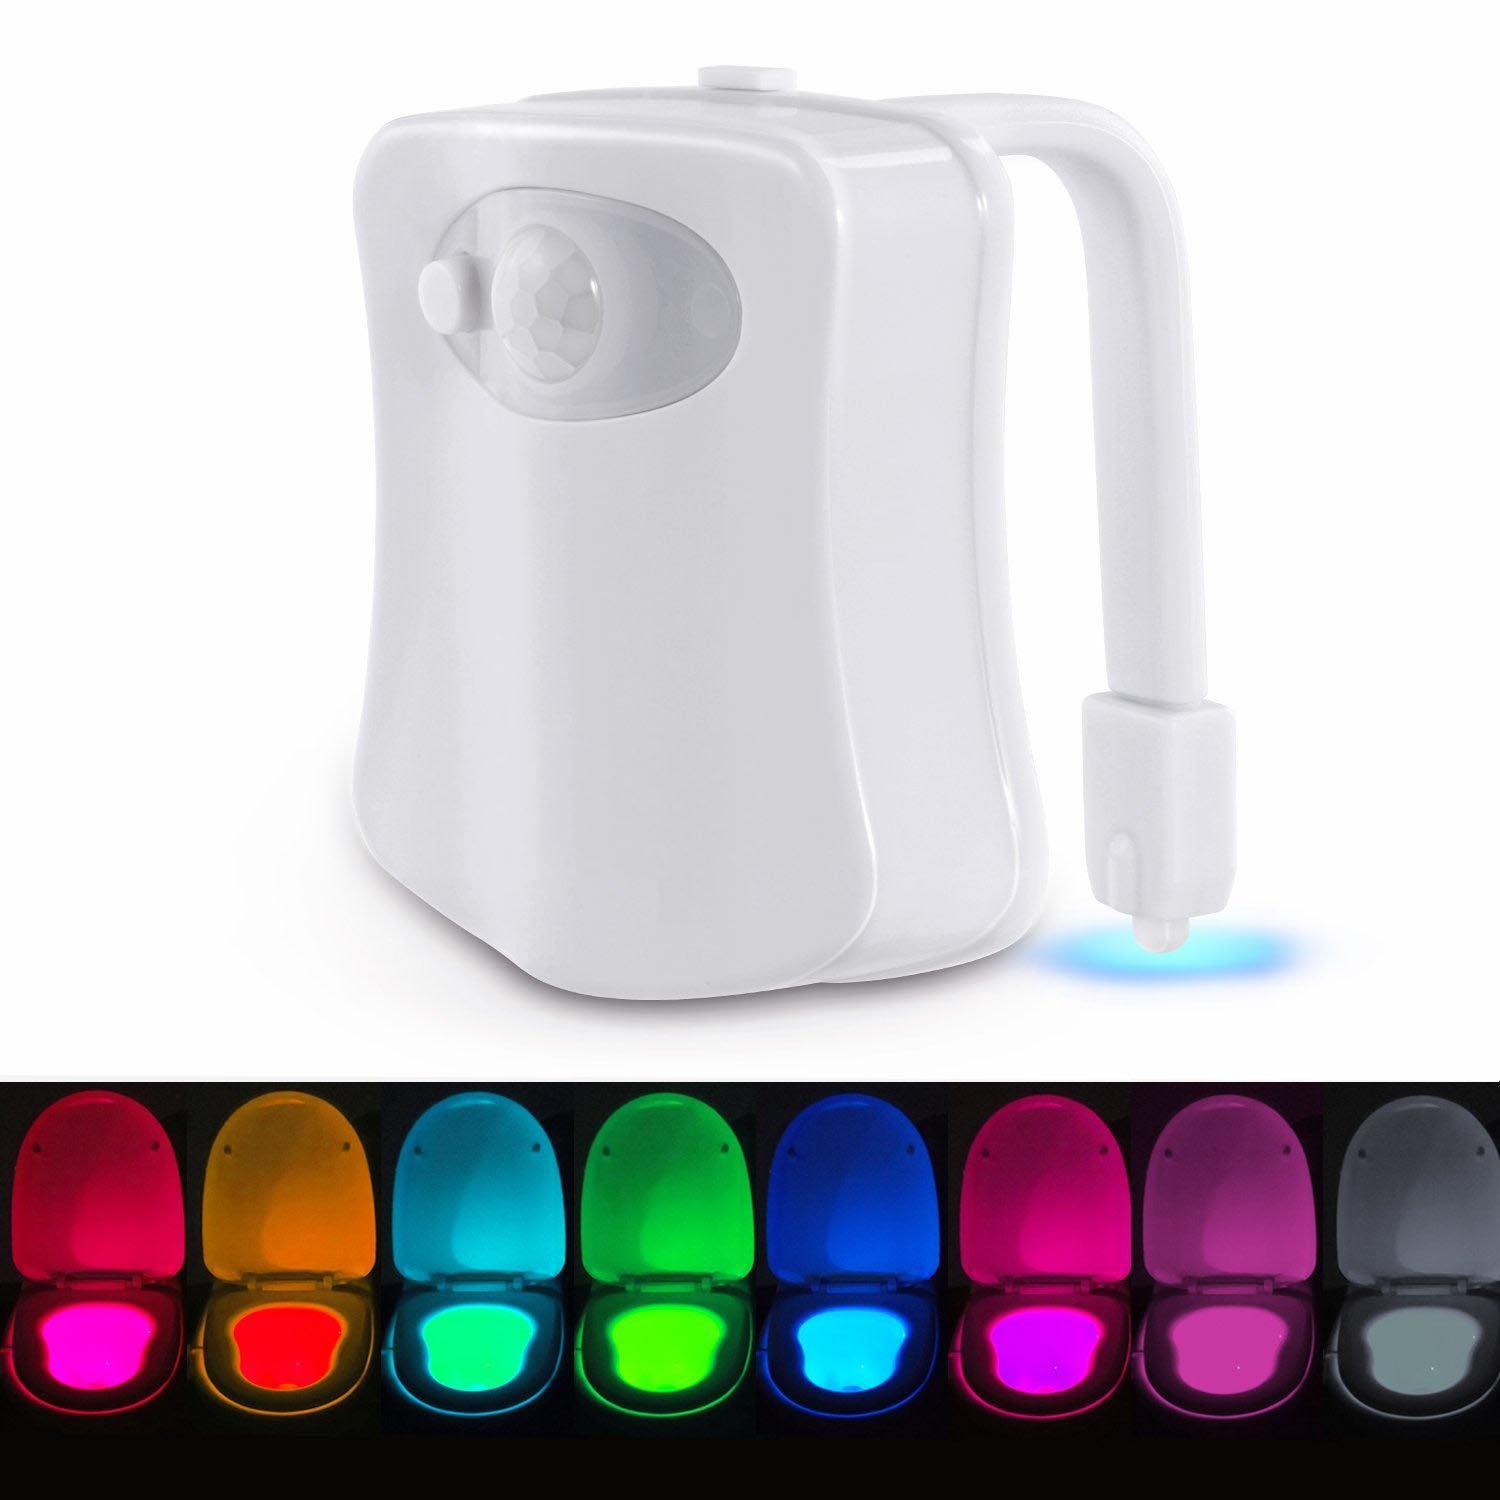 

8 Colors LED Toilet Light Changing Motion Activated Bathroom Toilet Seat Night Light Lamp